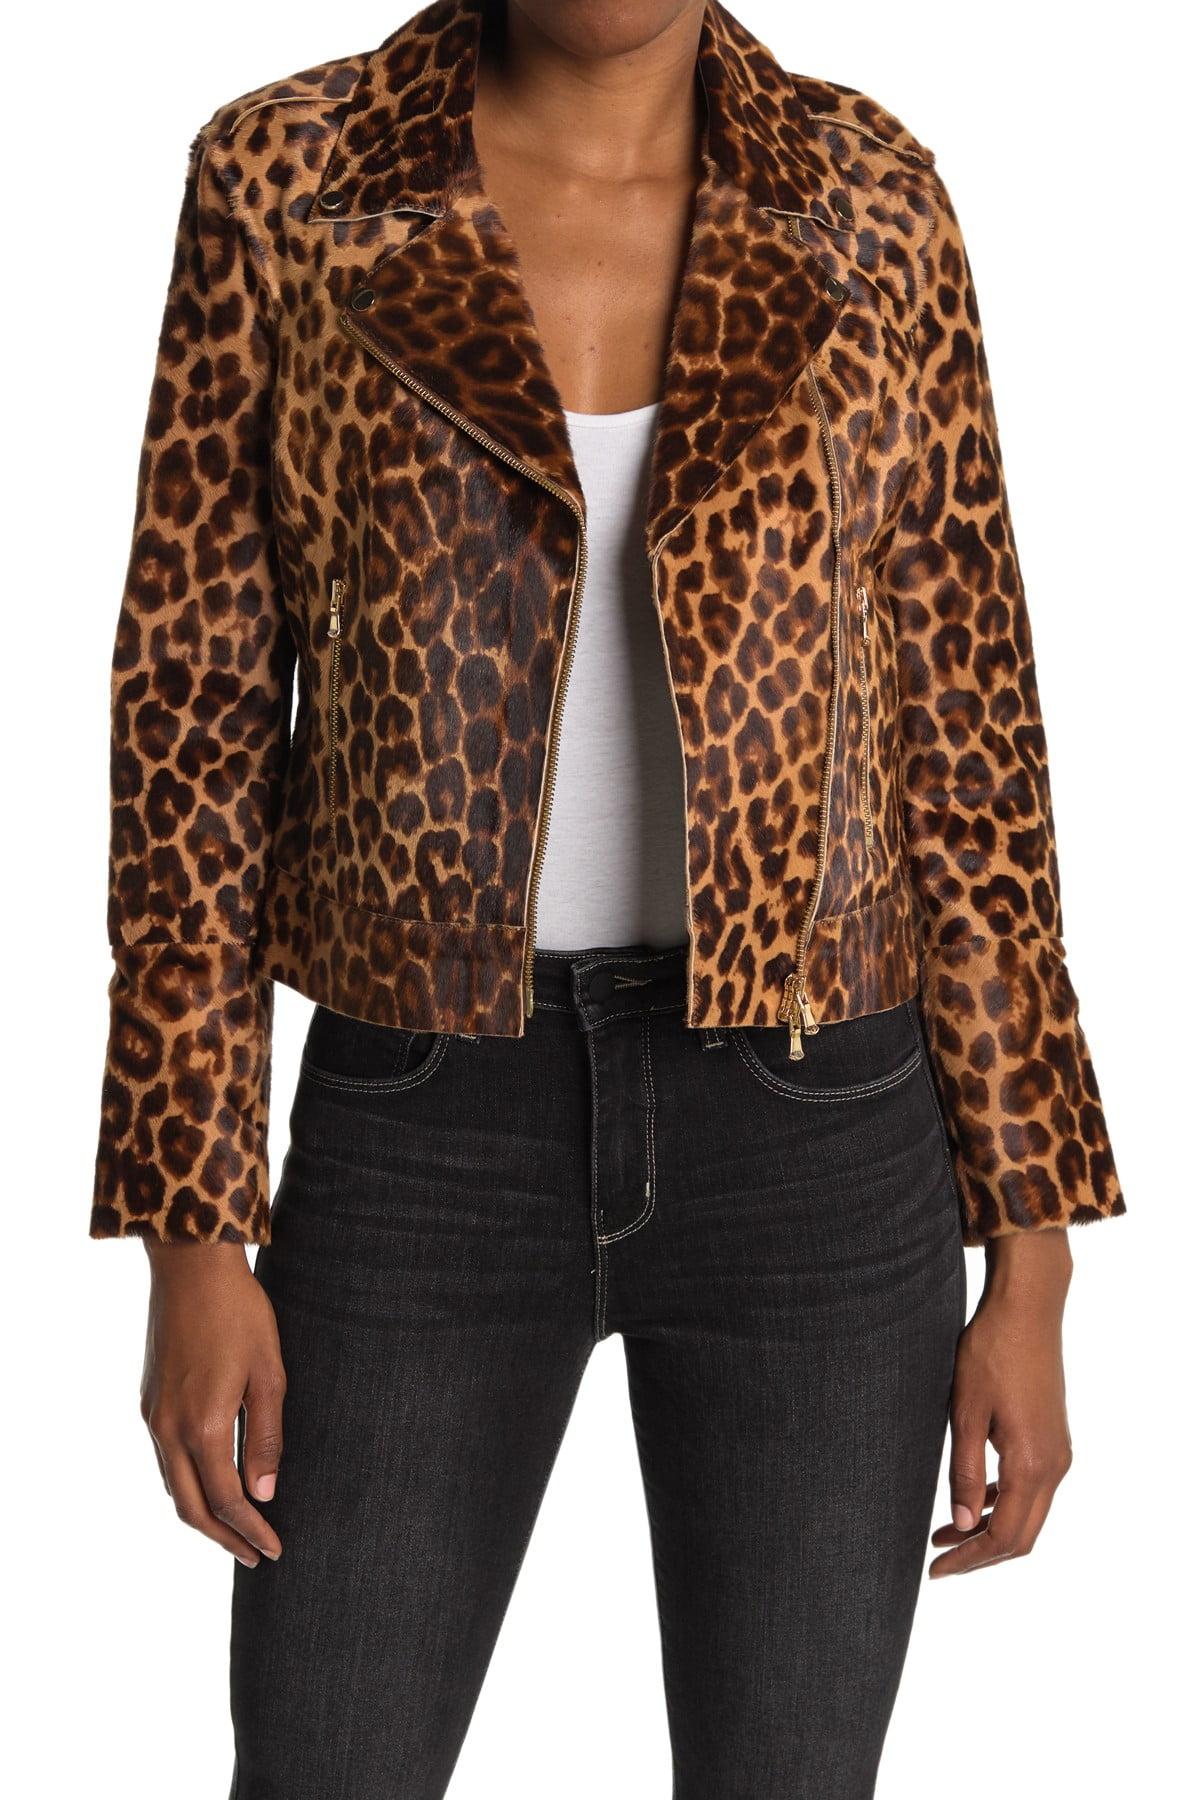 L'Agence Leopard Print Leather Moto Jacket in Natural | Lyst